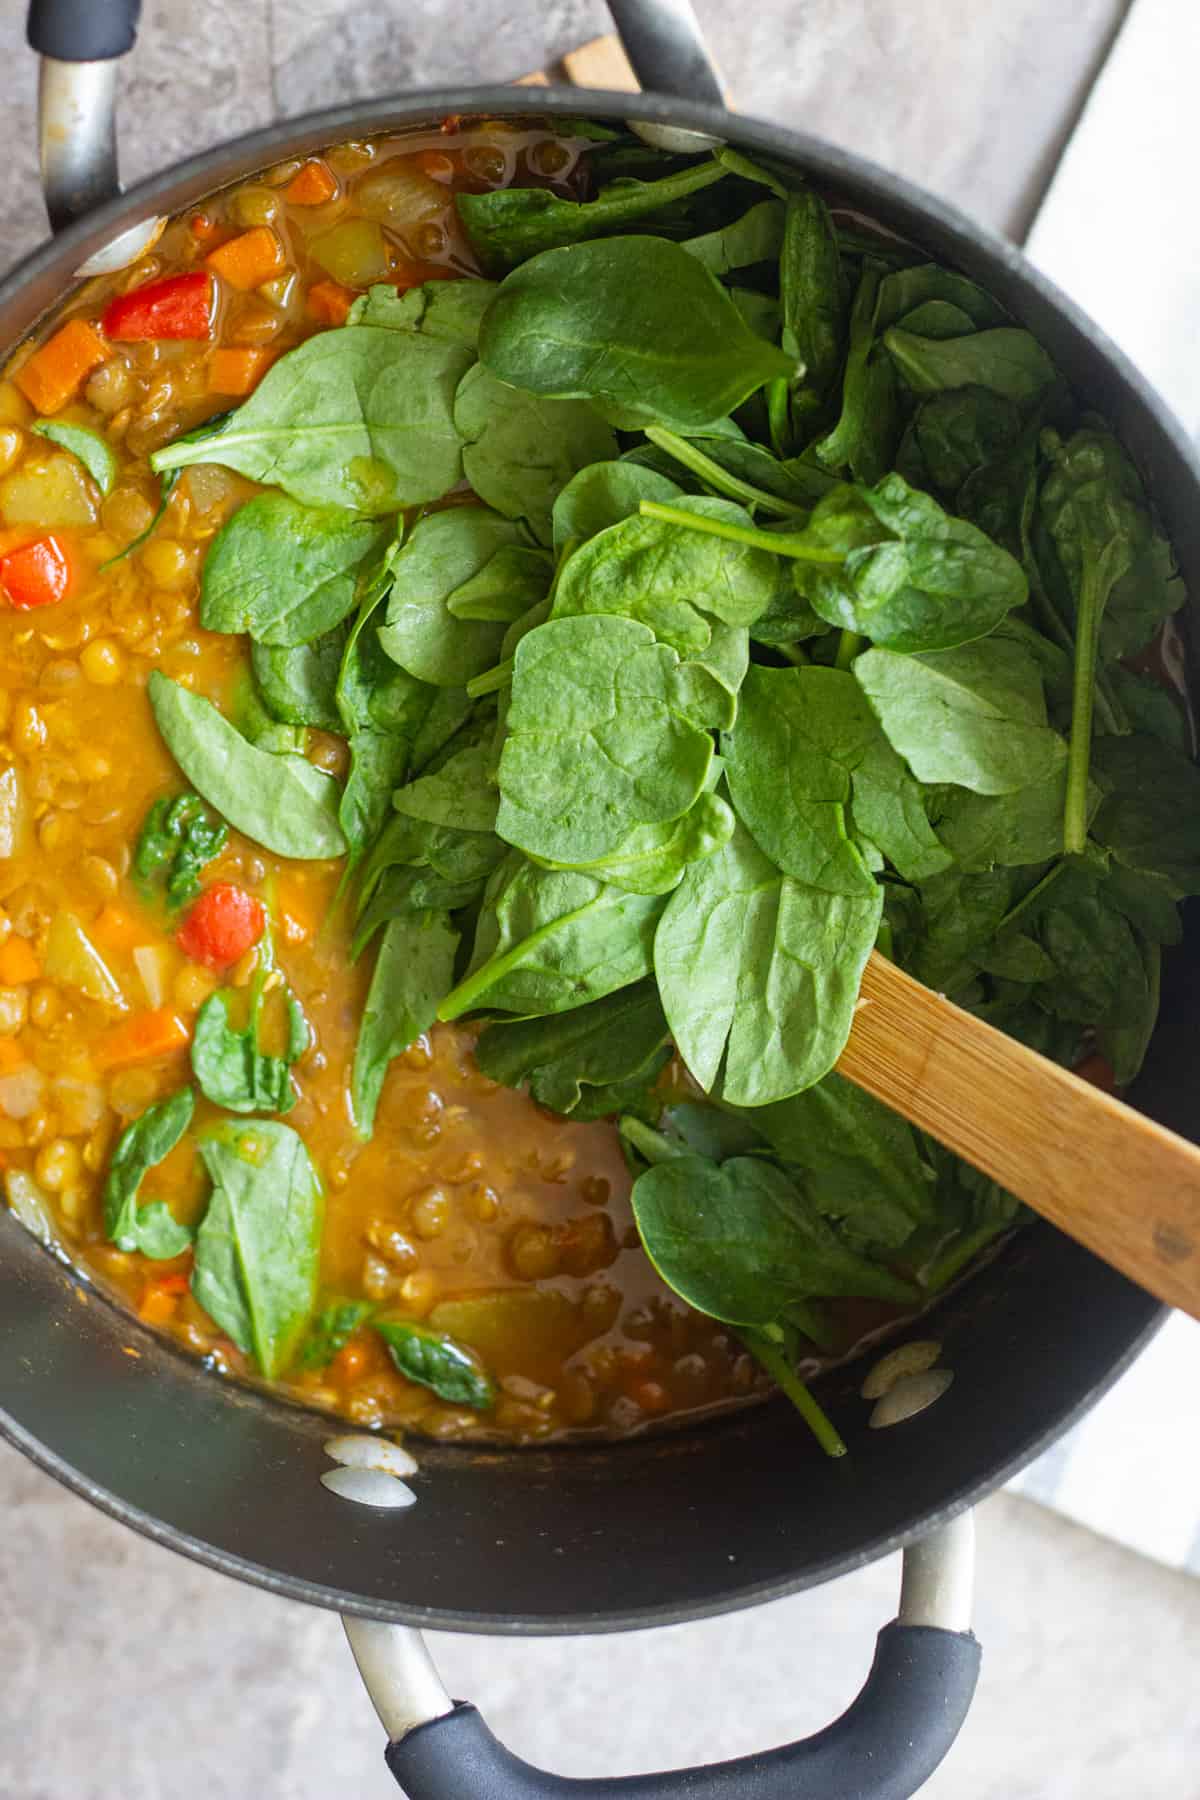 Add spinach to the soup at the last minute and stir just enough for the leaves to wilt.